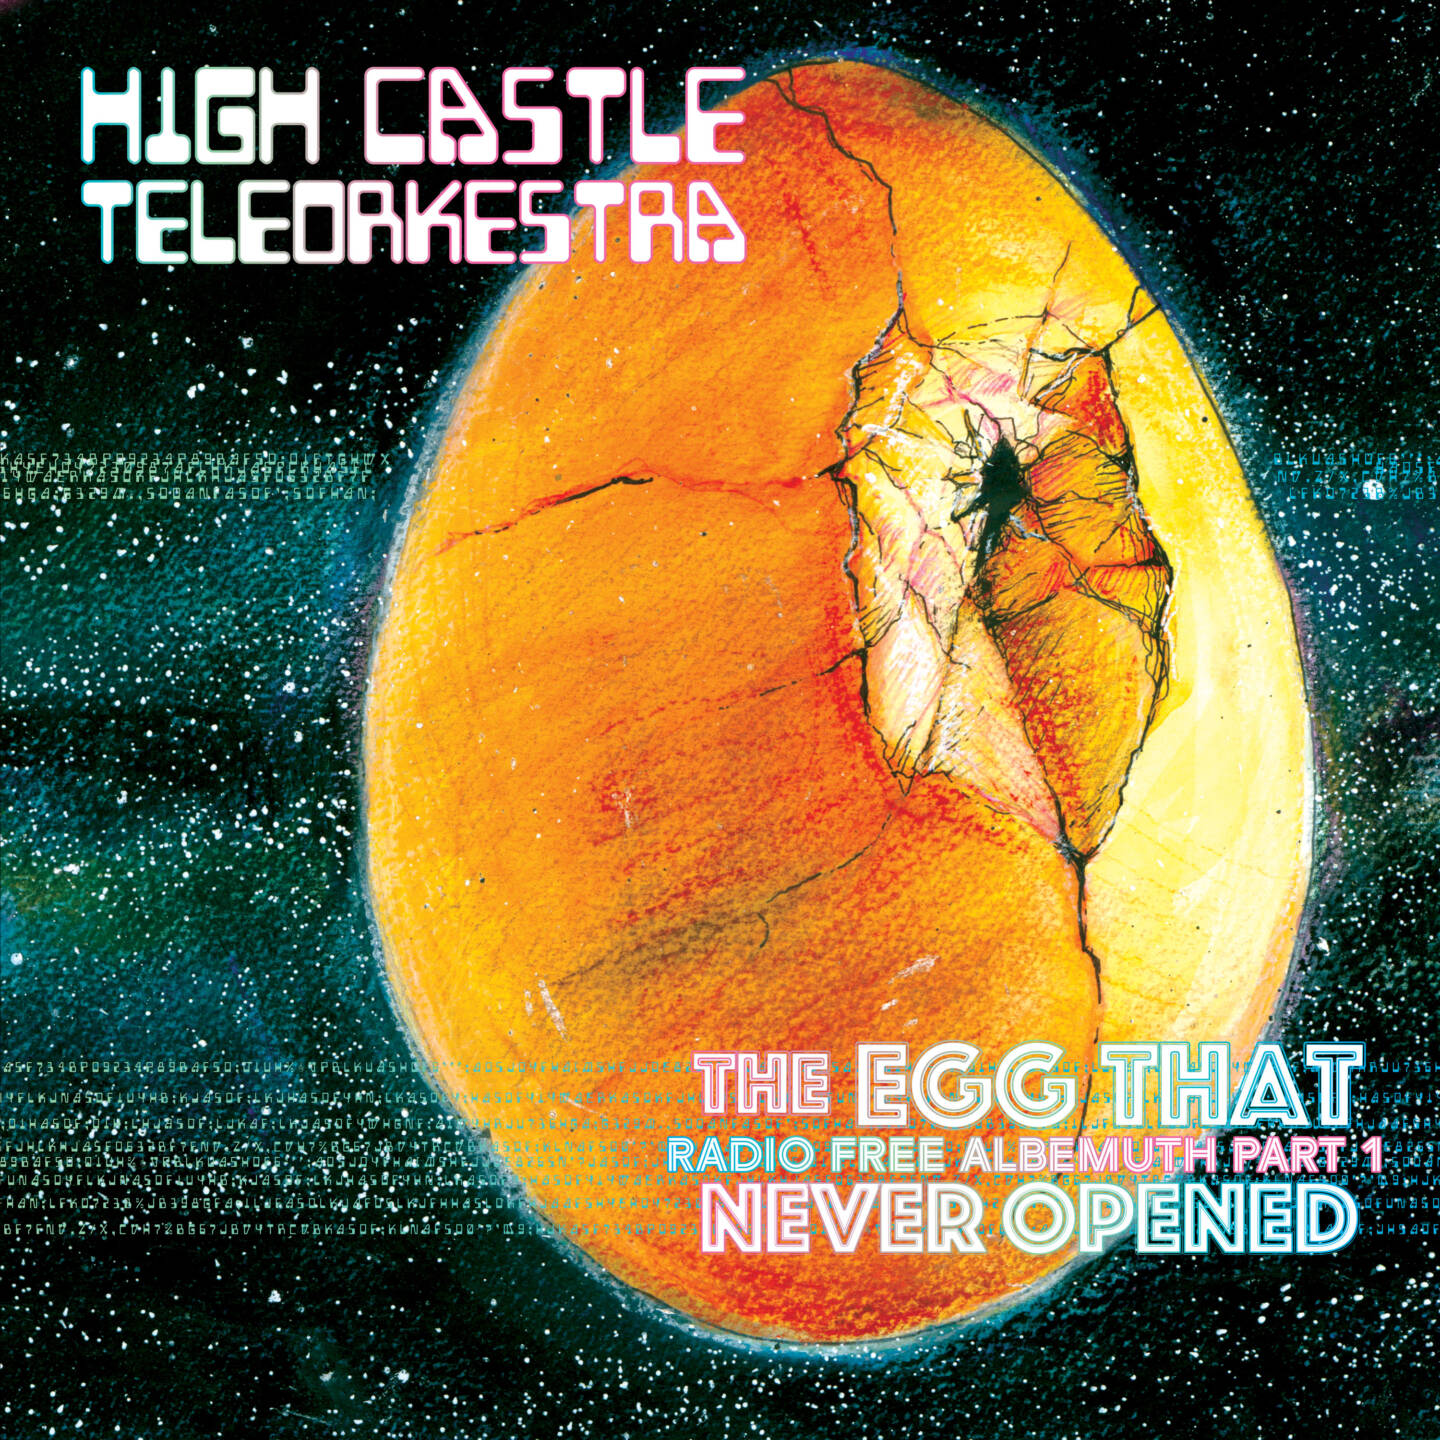 High Castle Teleorkestra - The Egg That Never Hatched